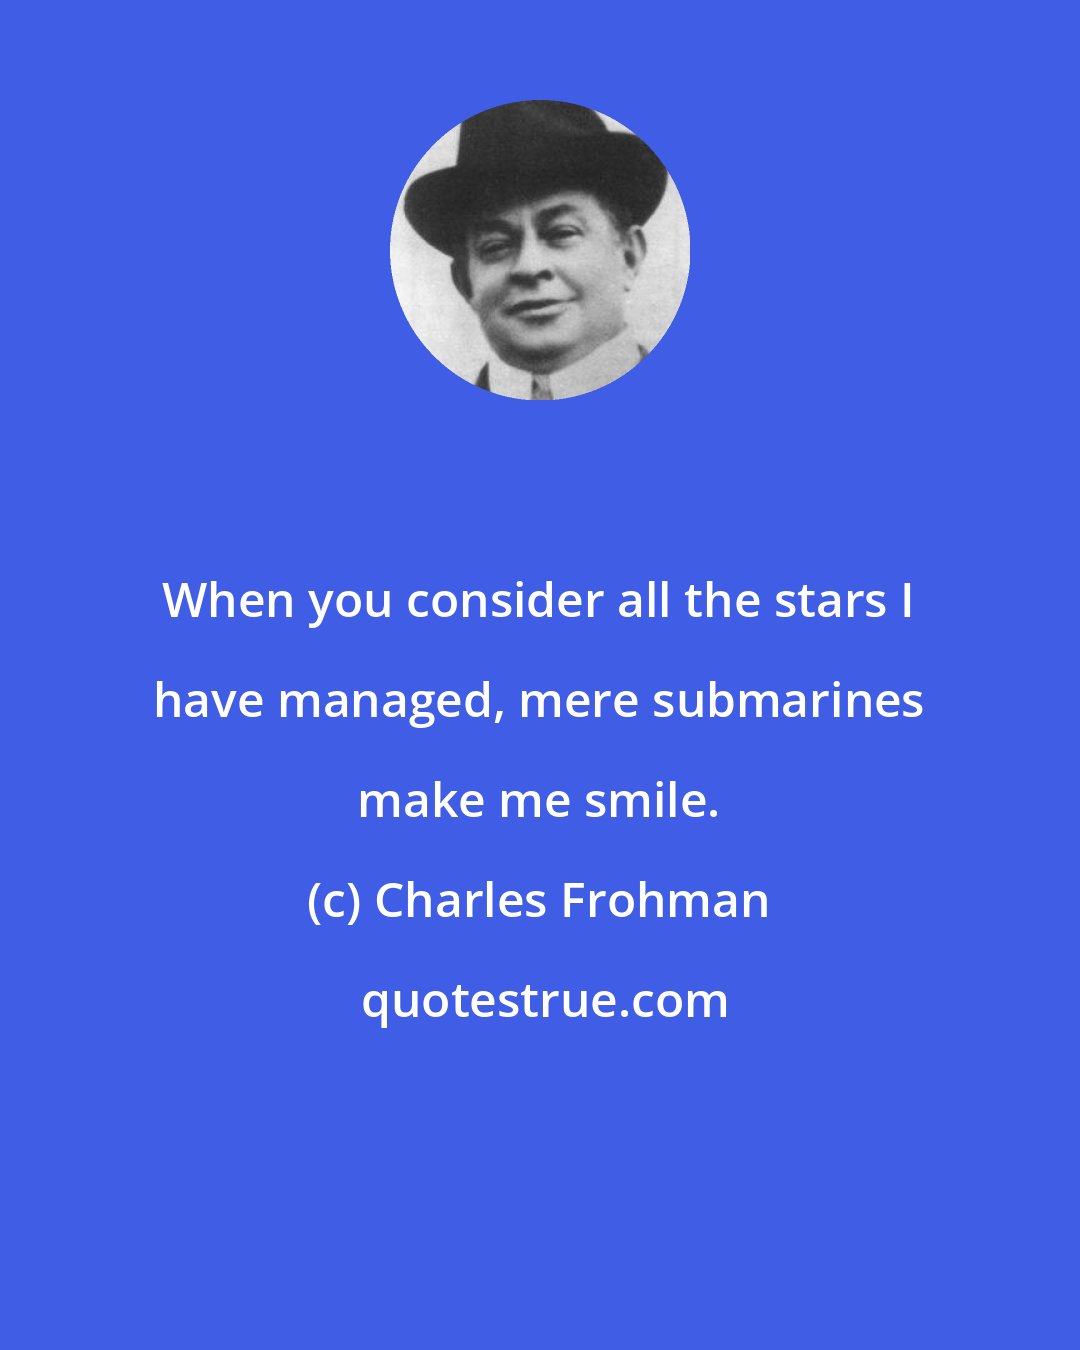 Charles Frohman: When you consider all the stars I have managed, mere submarines make me smile.